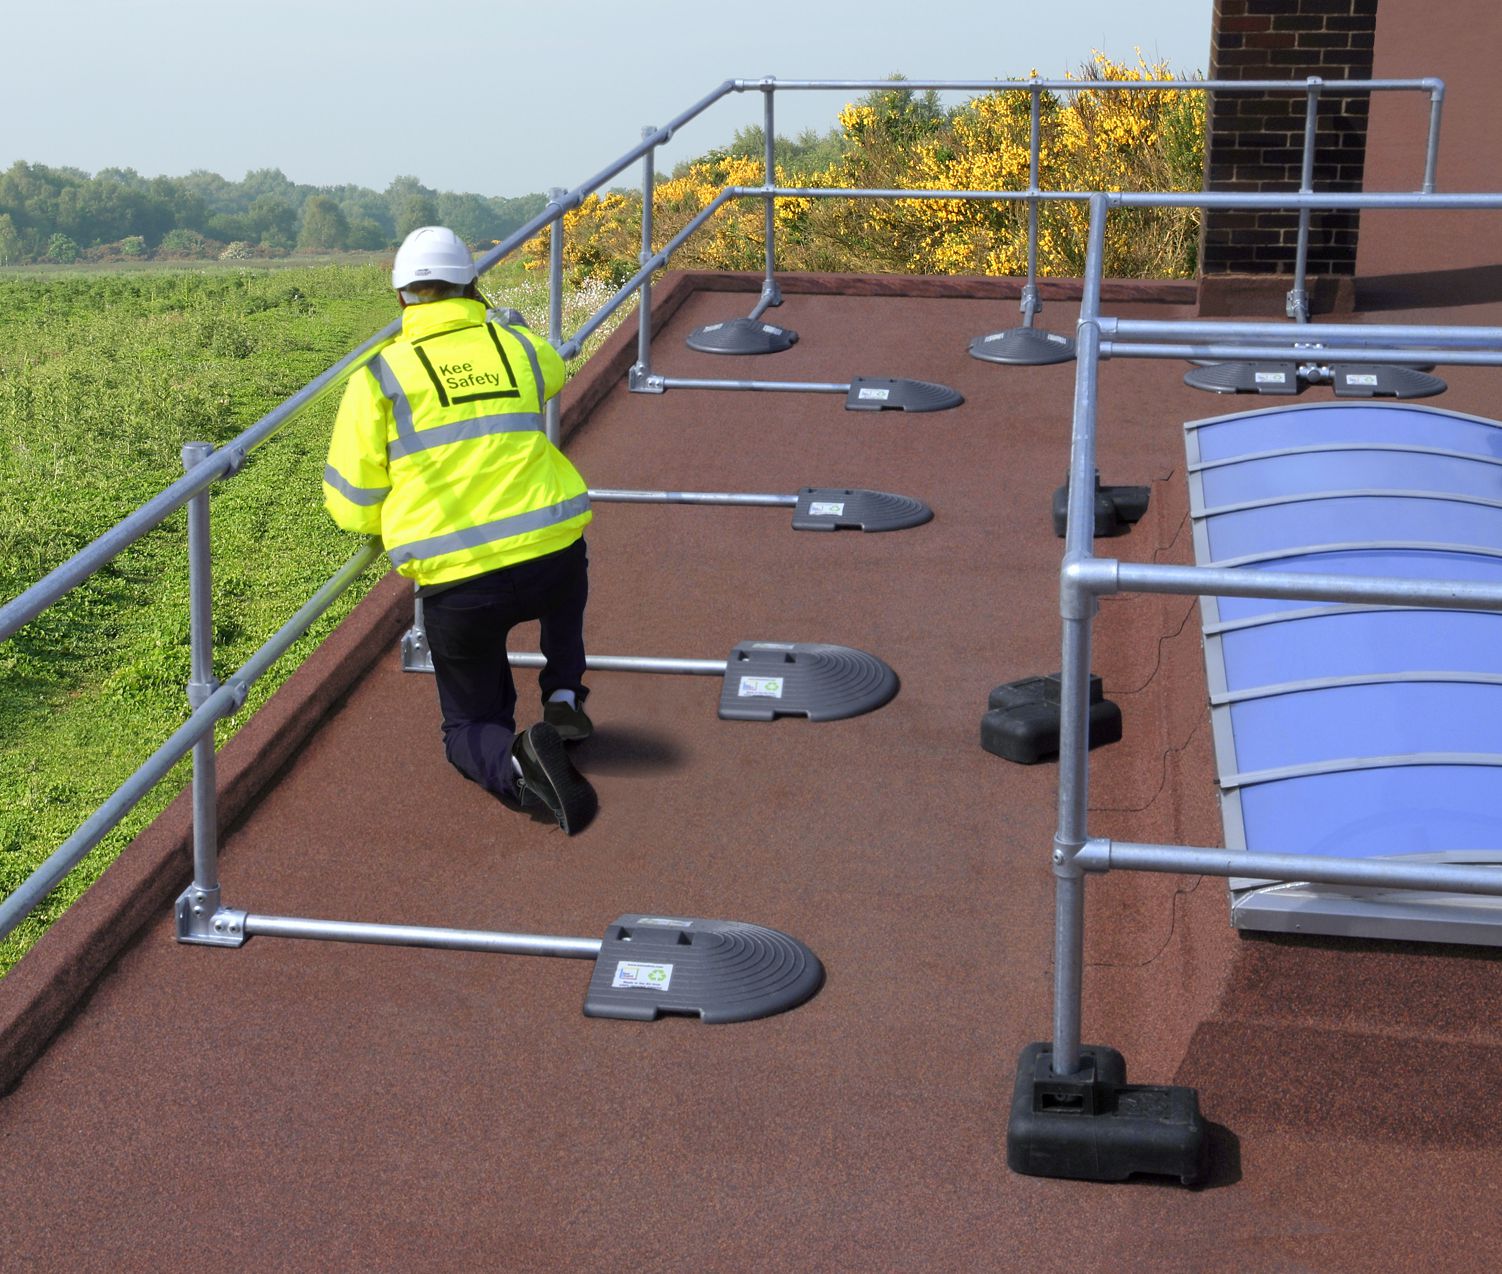 Roof Edge Railings Rooftop Safety Equipment Roof Top Safety